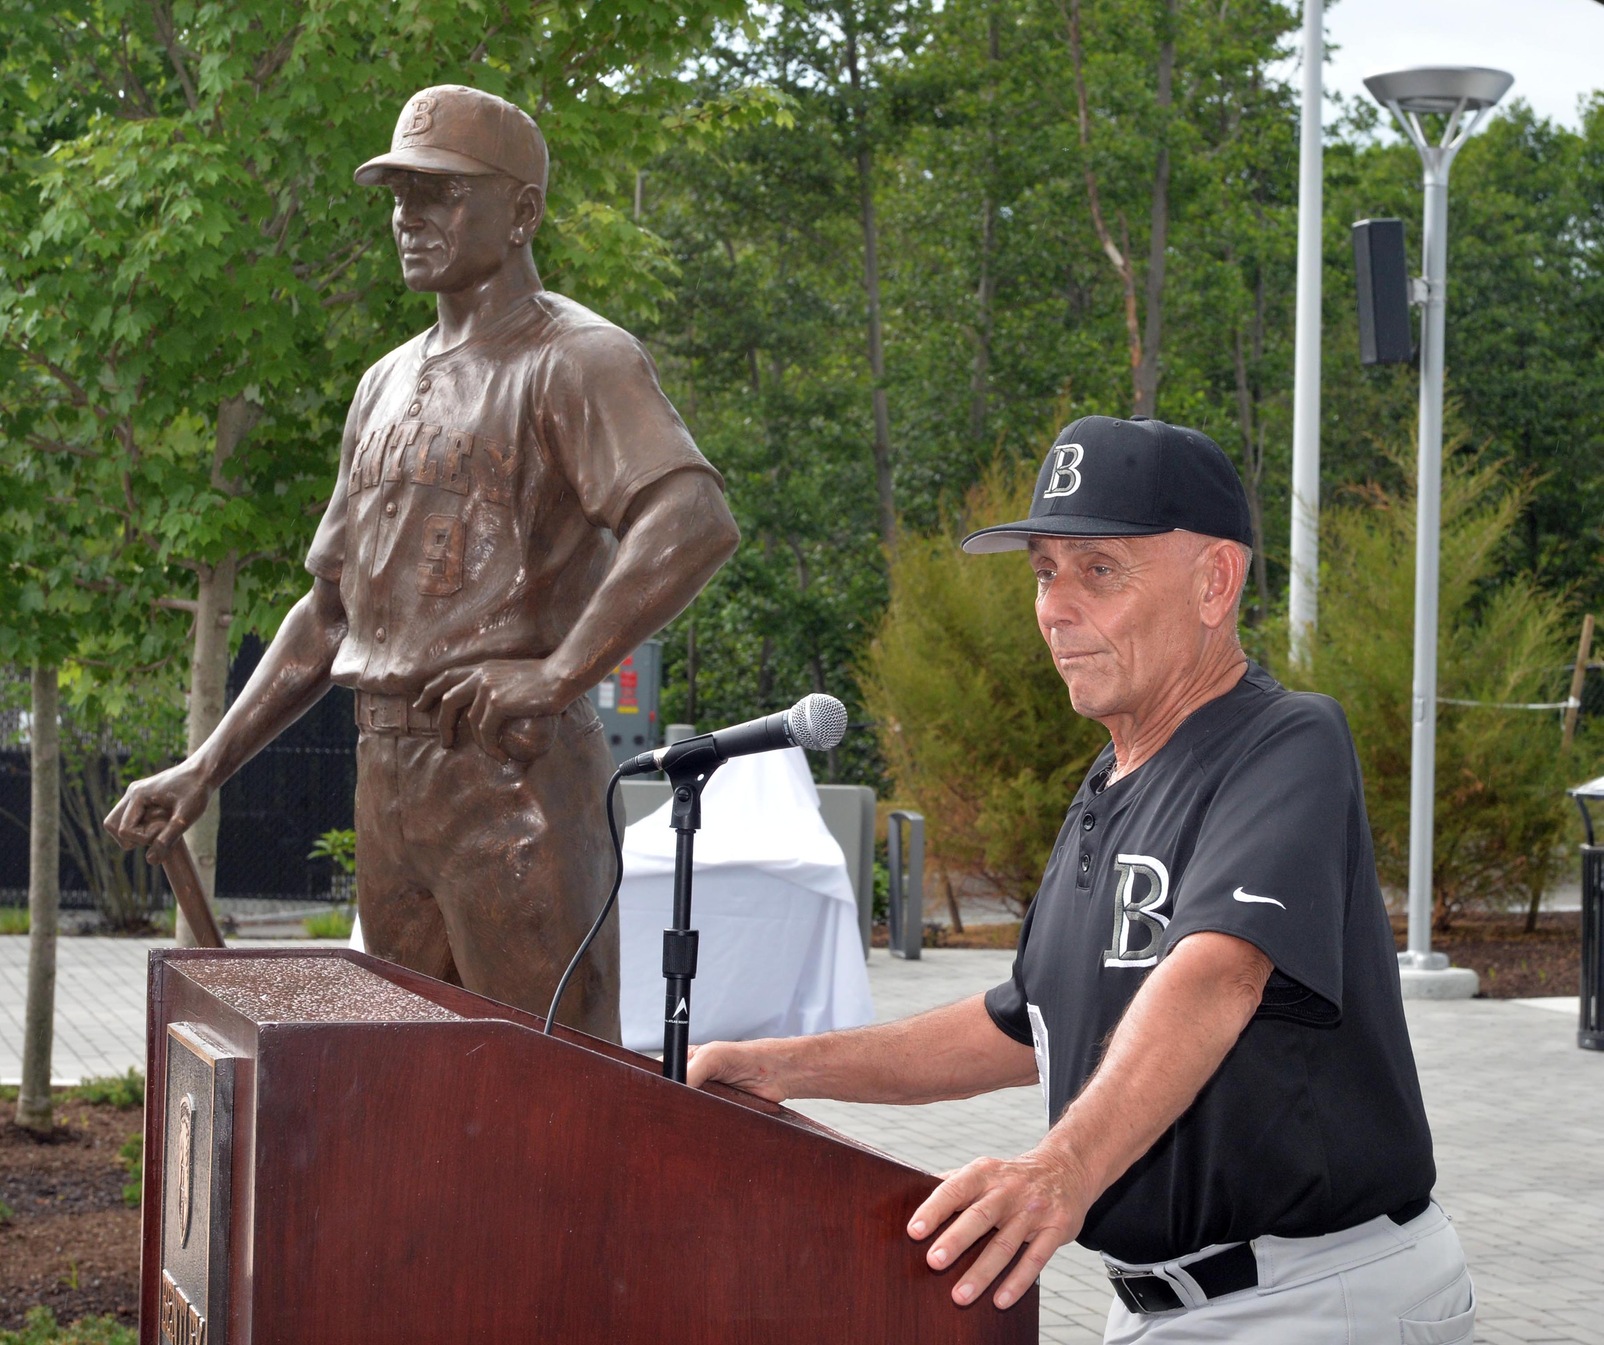 Coach DeFelice, along side the statue